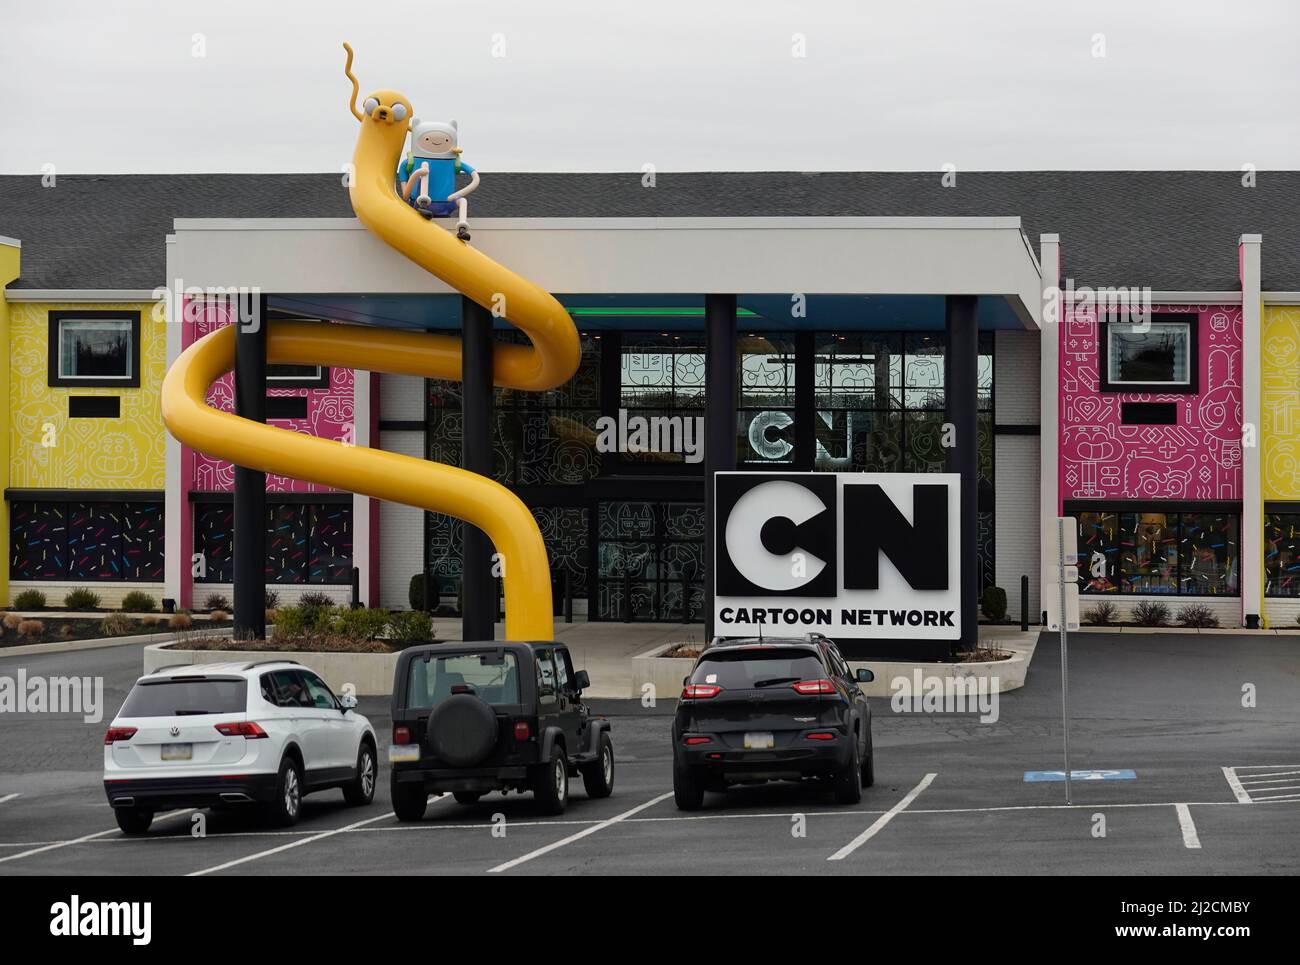 The Cartoon Network Hotel is Opening 2020 in Lancaster, PA!